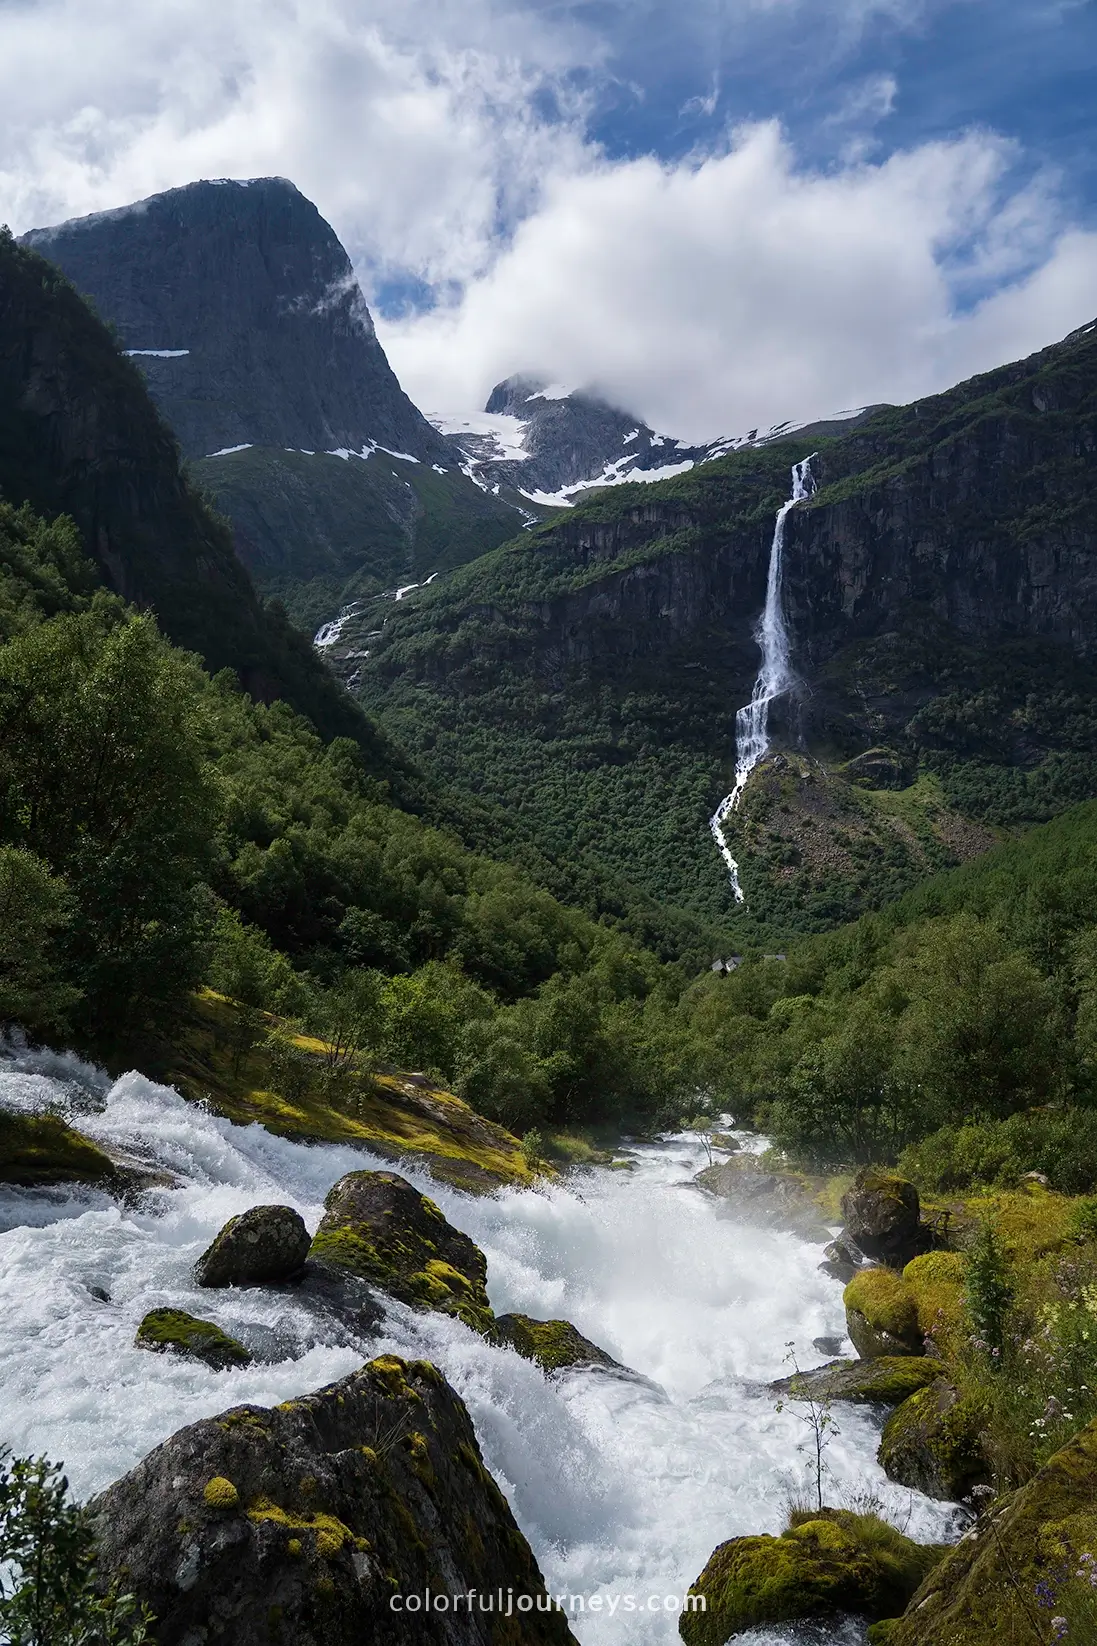 Kleivafossen waterfall with mountains in the background in Norway